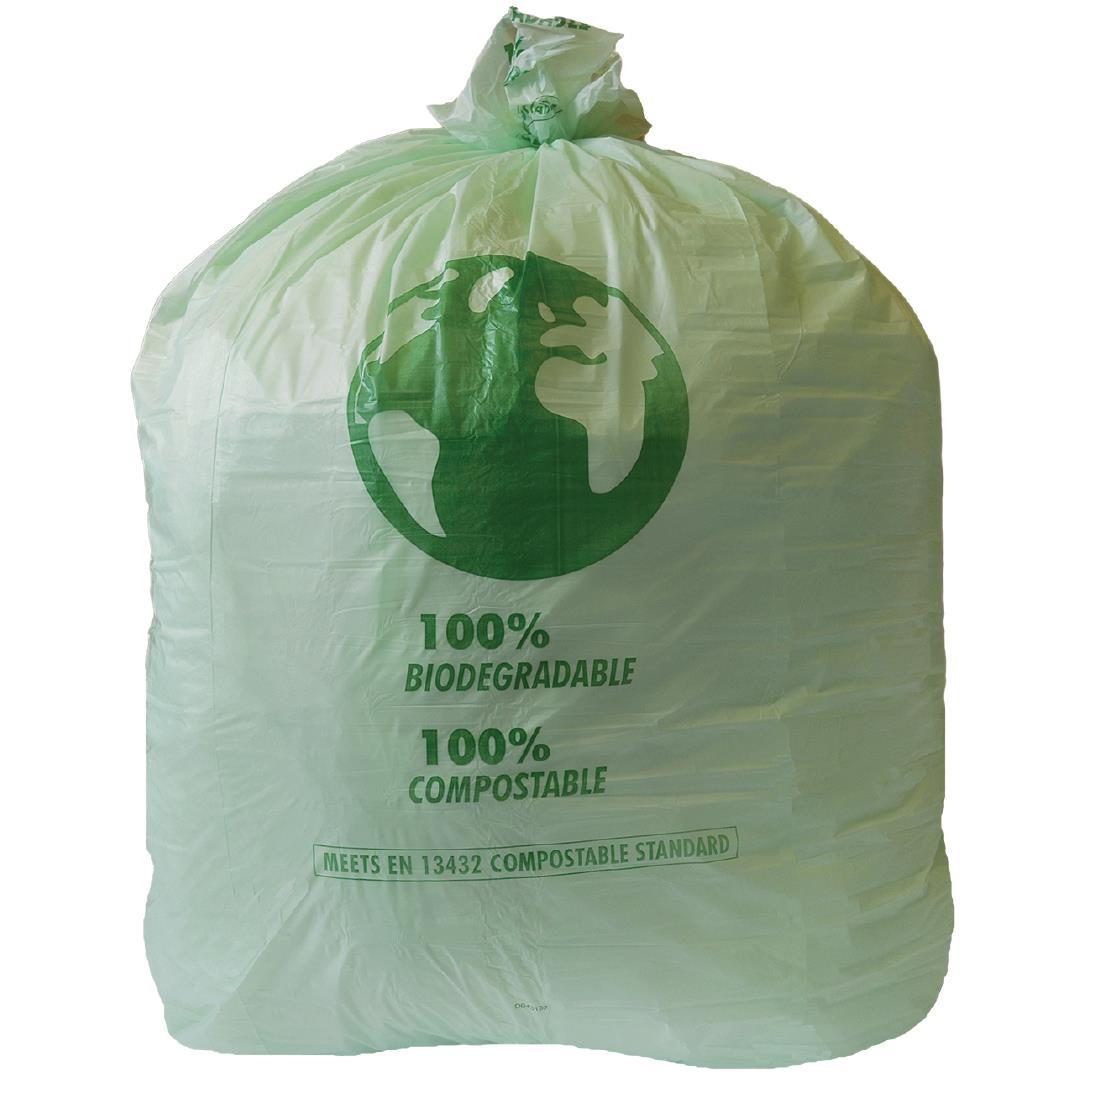 Jantex Large Compostable Bin Liners 90Ltr (Pack of 20) - CT909  - 1